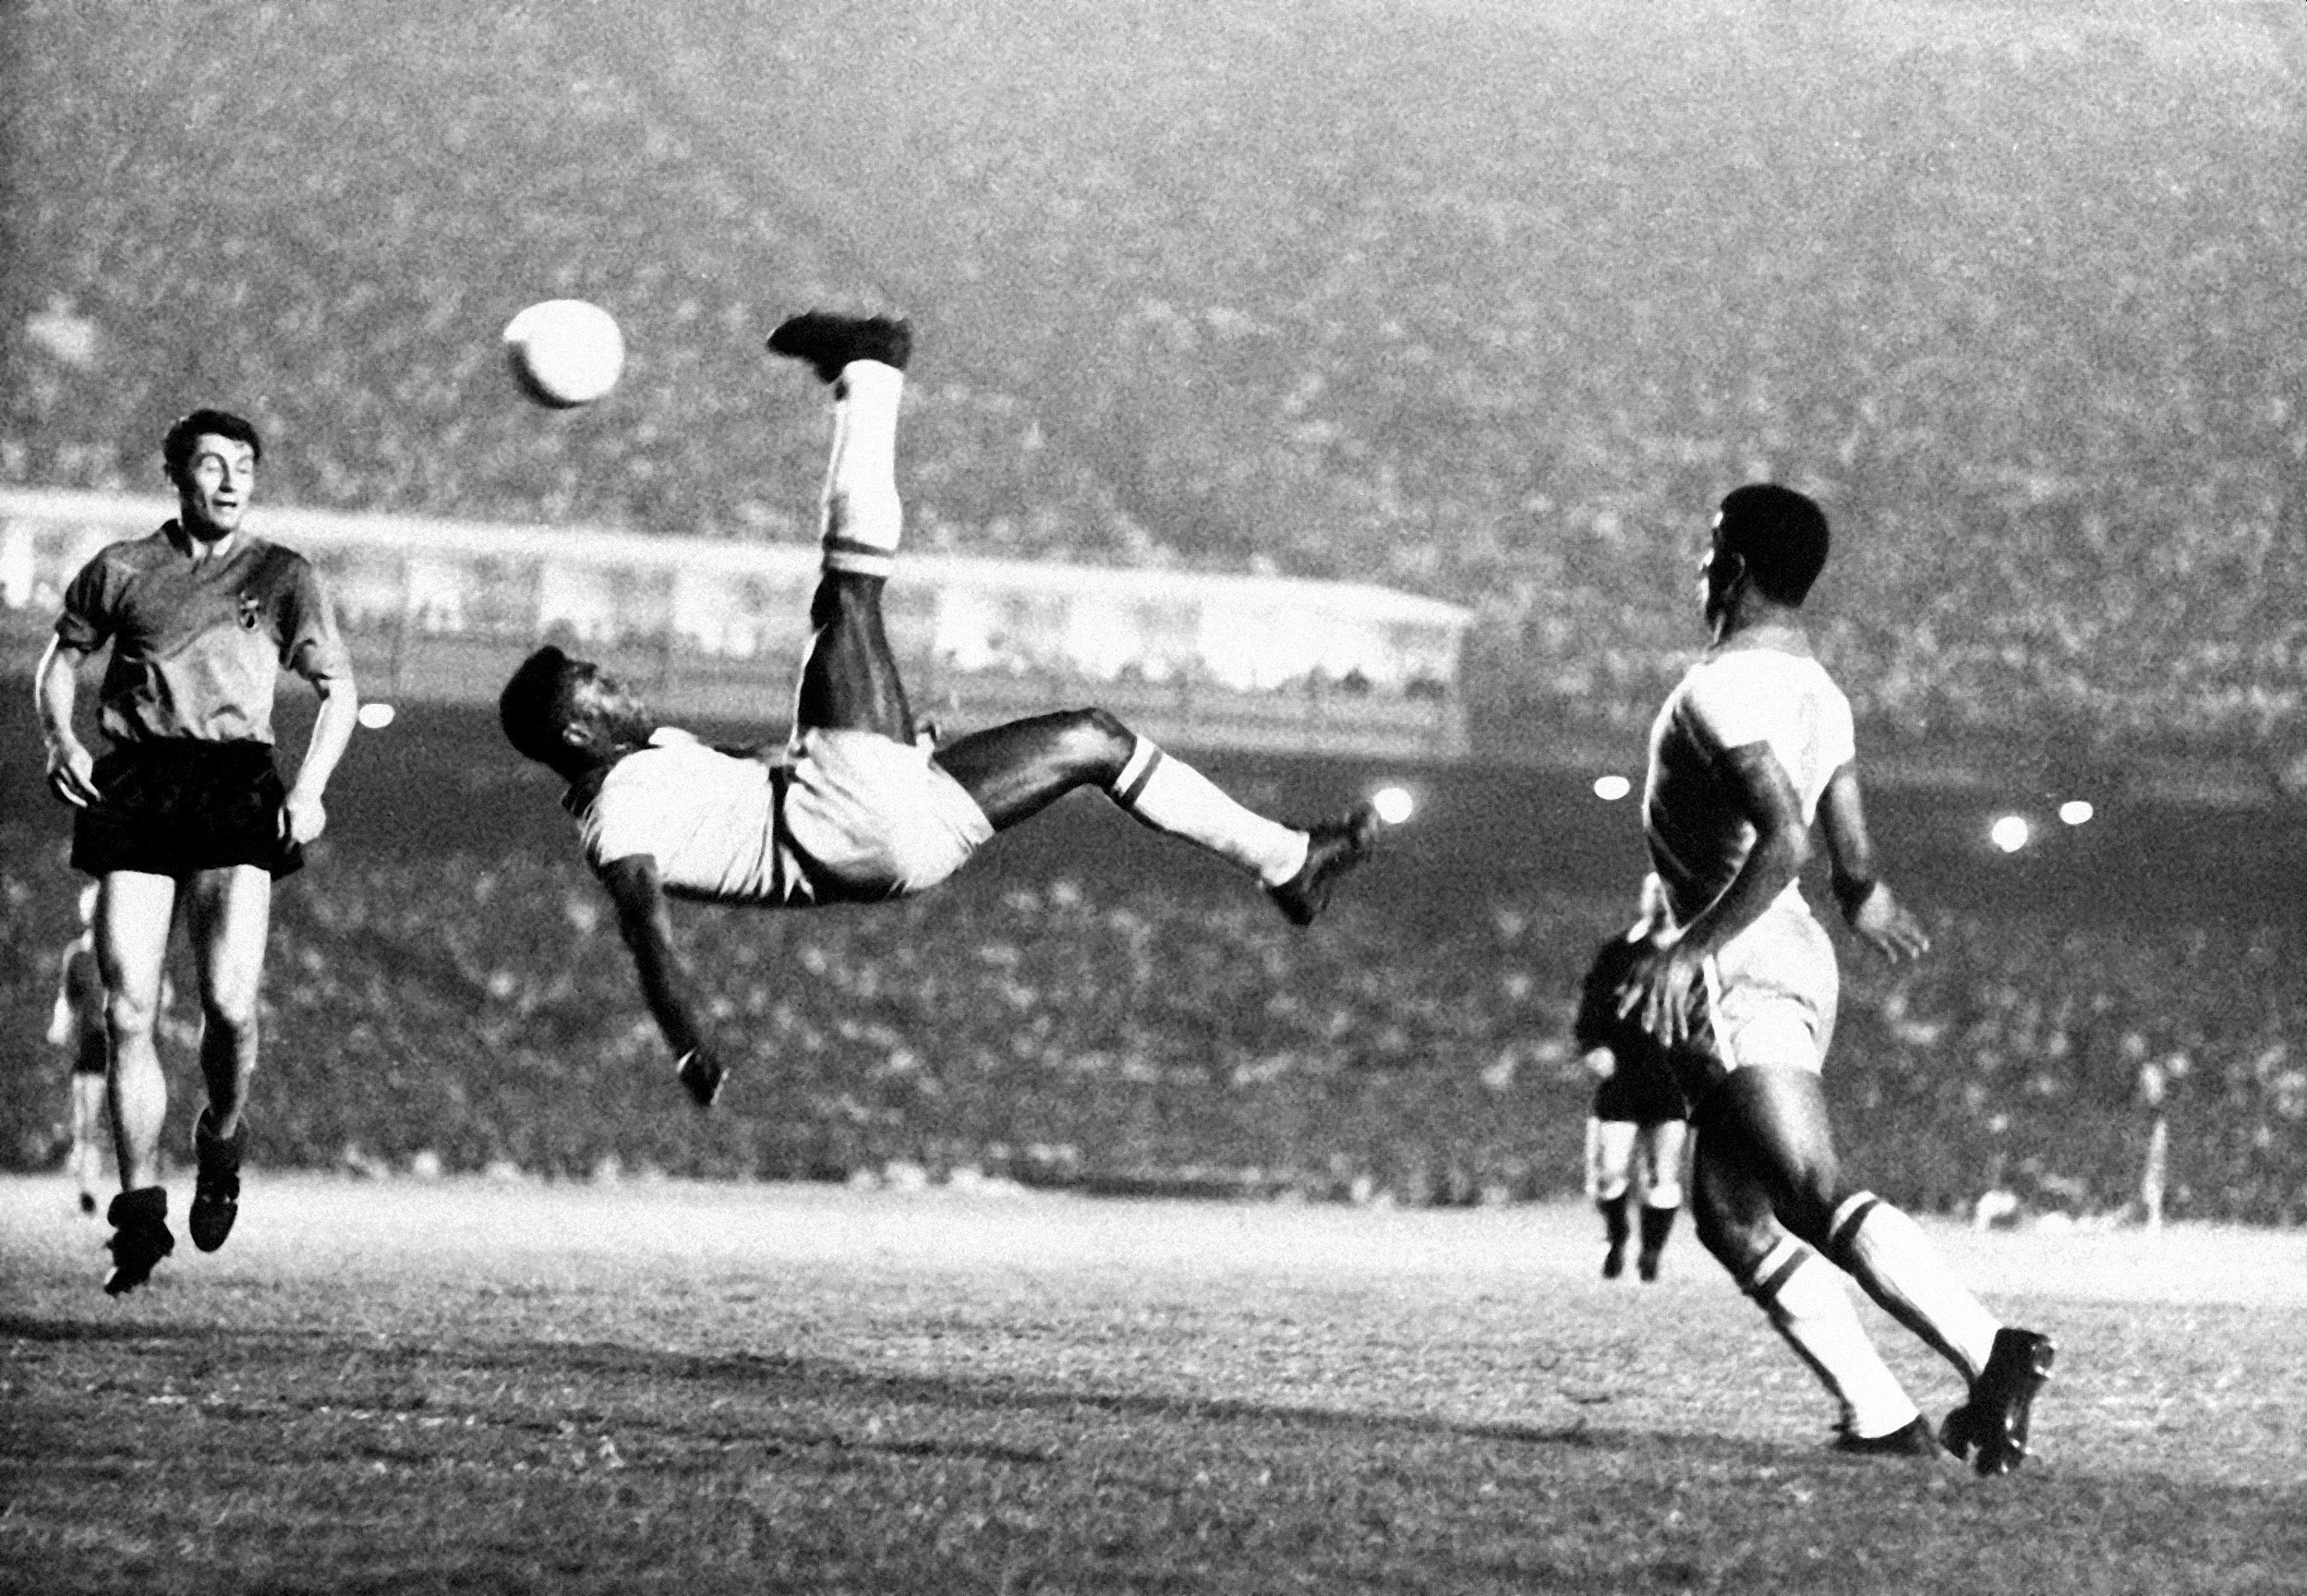 Pelé bicycle kicks a ball during a game at unknown location in September 1968